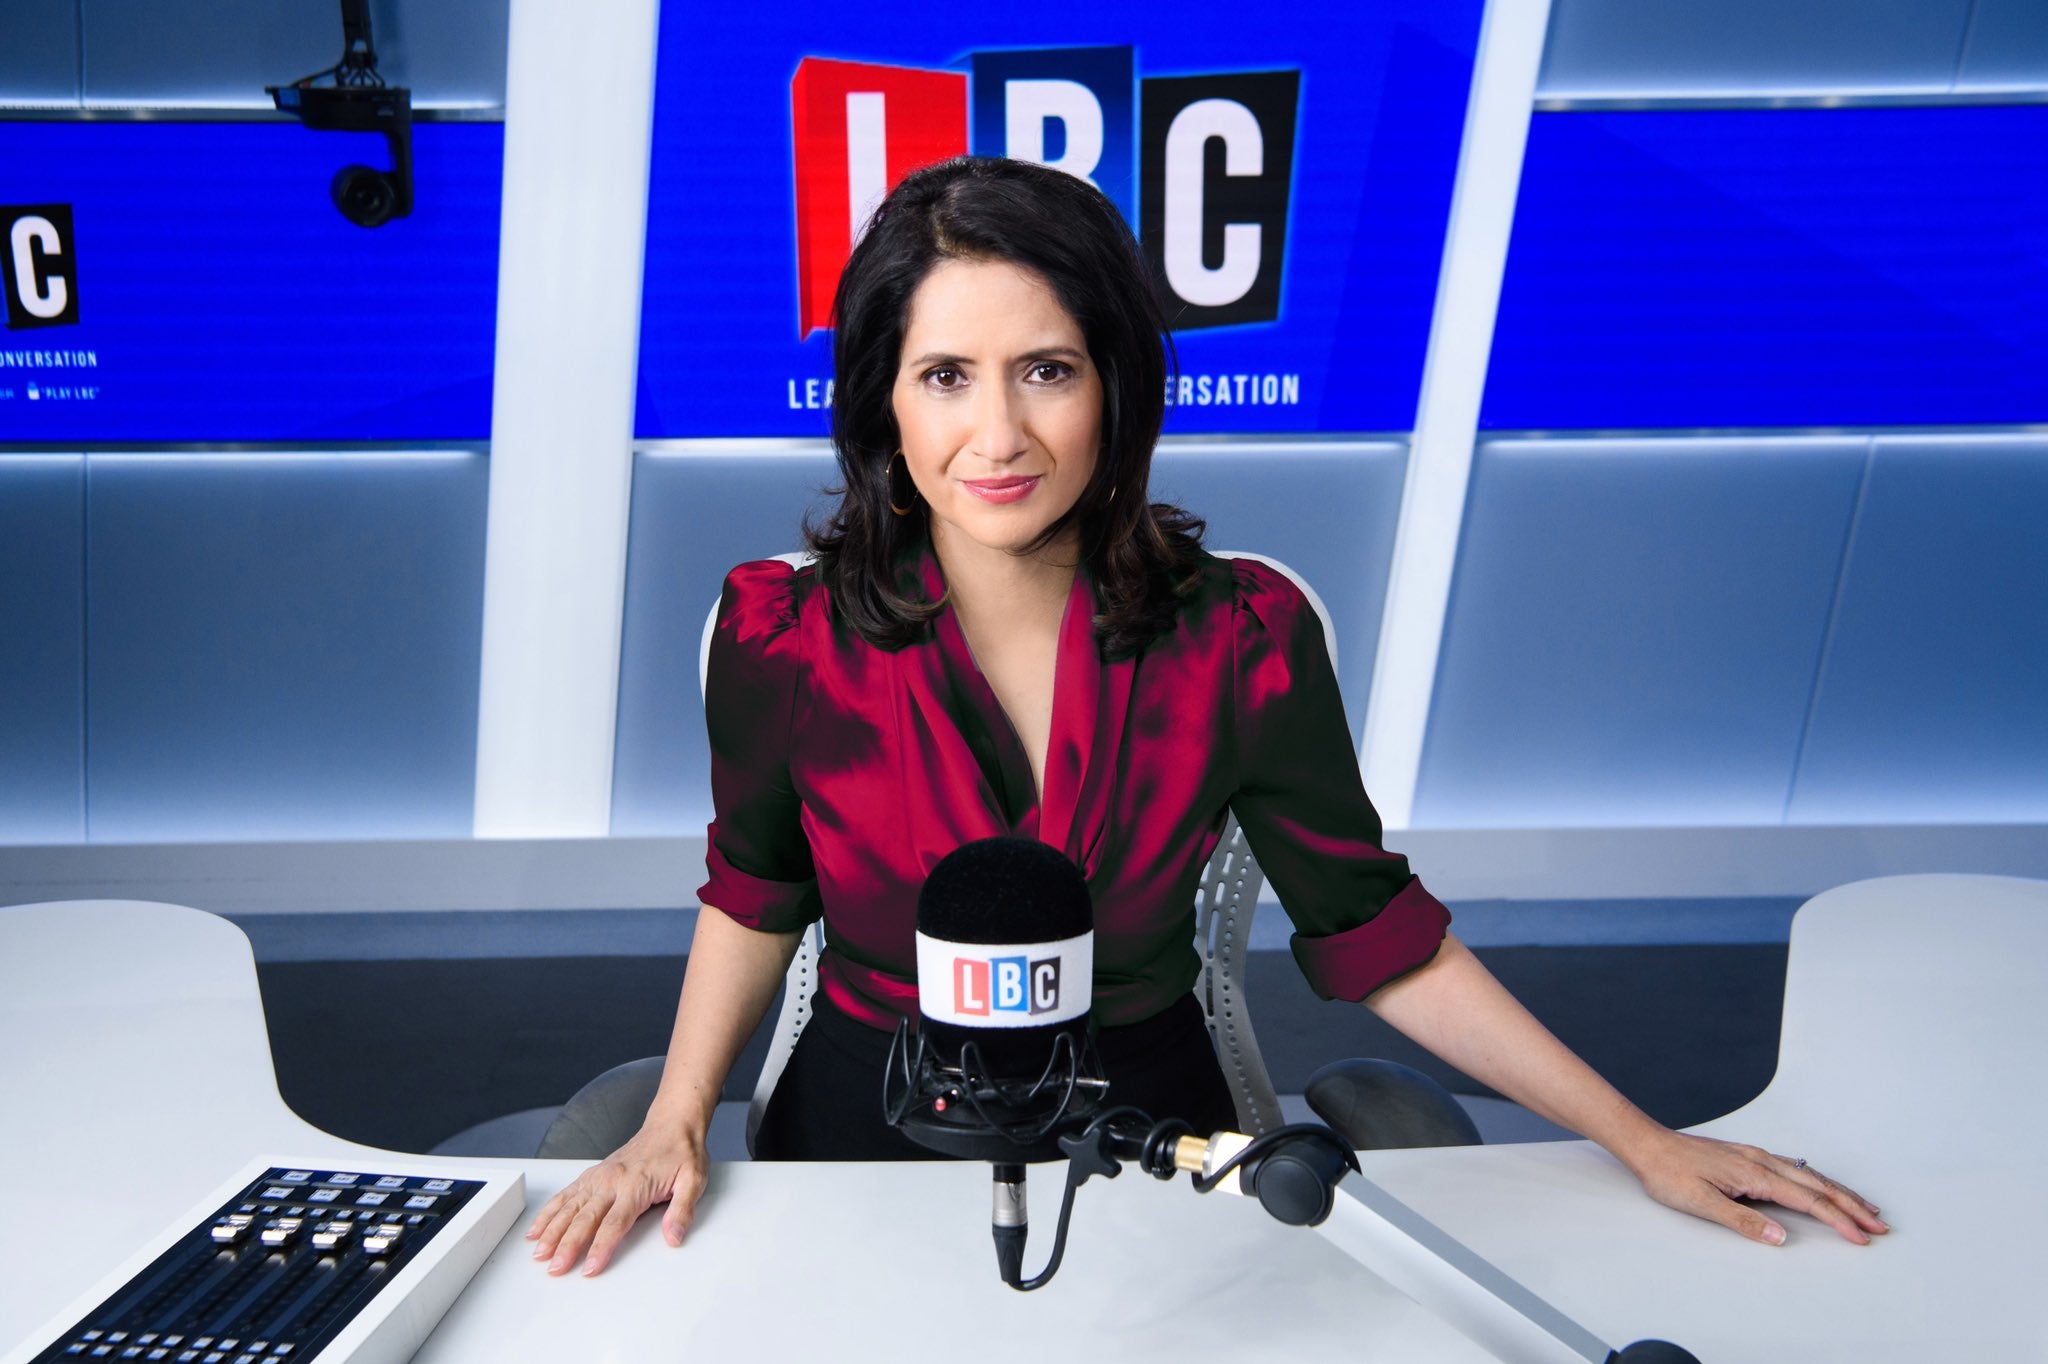 The presenter has mysteriously disappeared from LBC